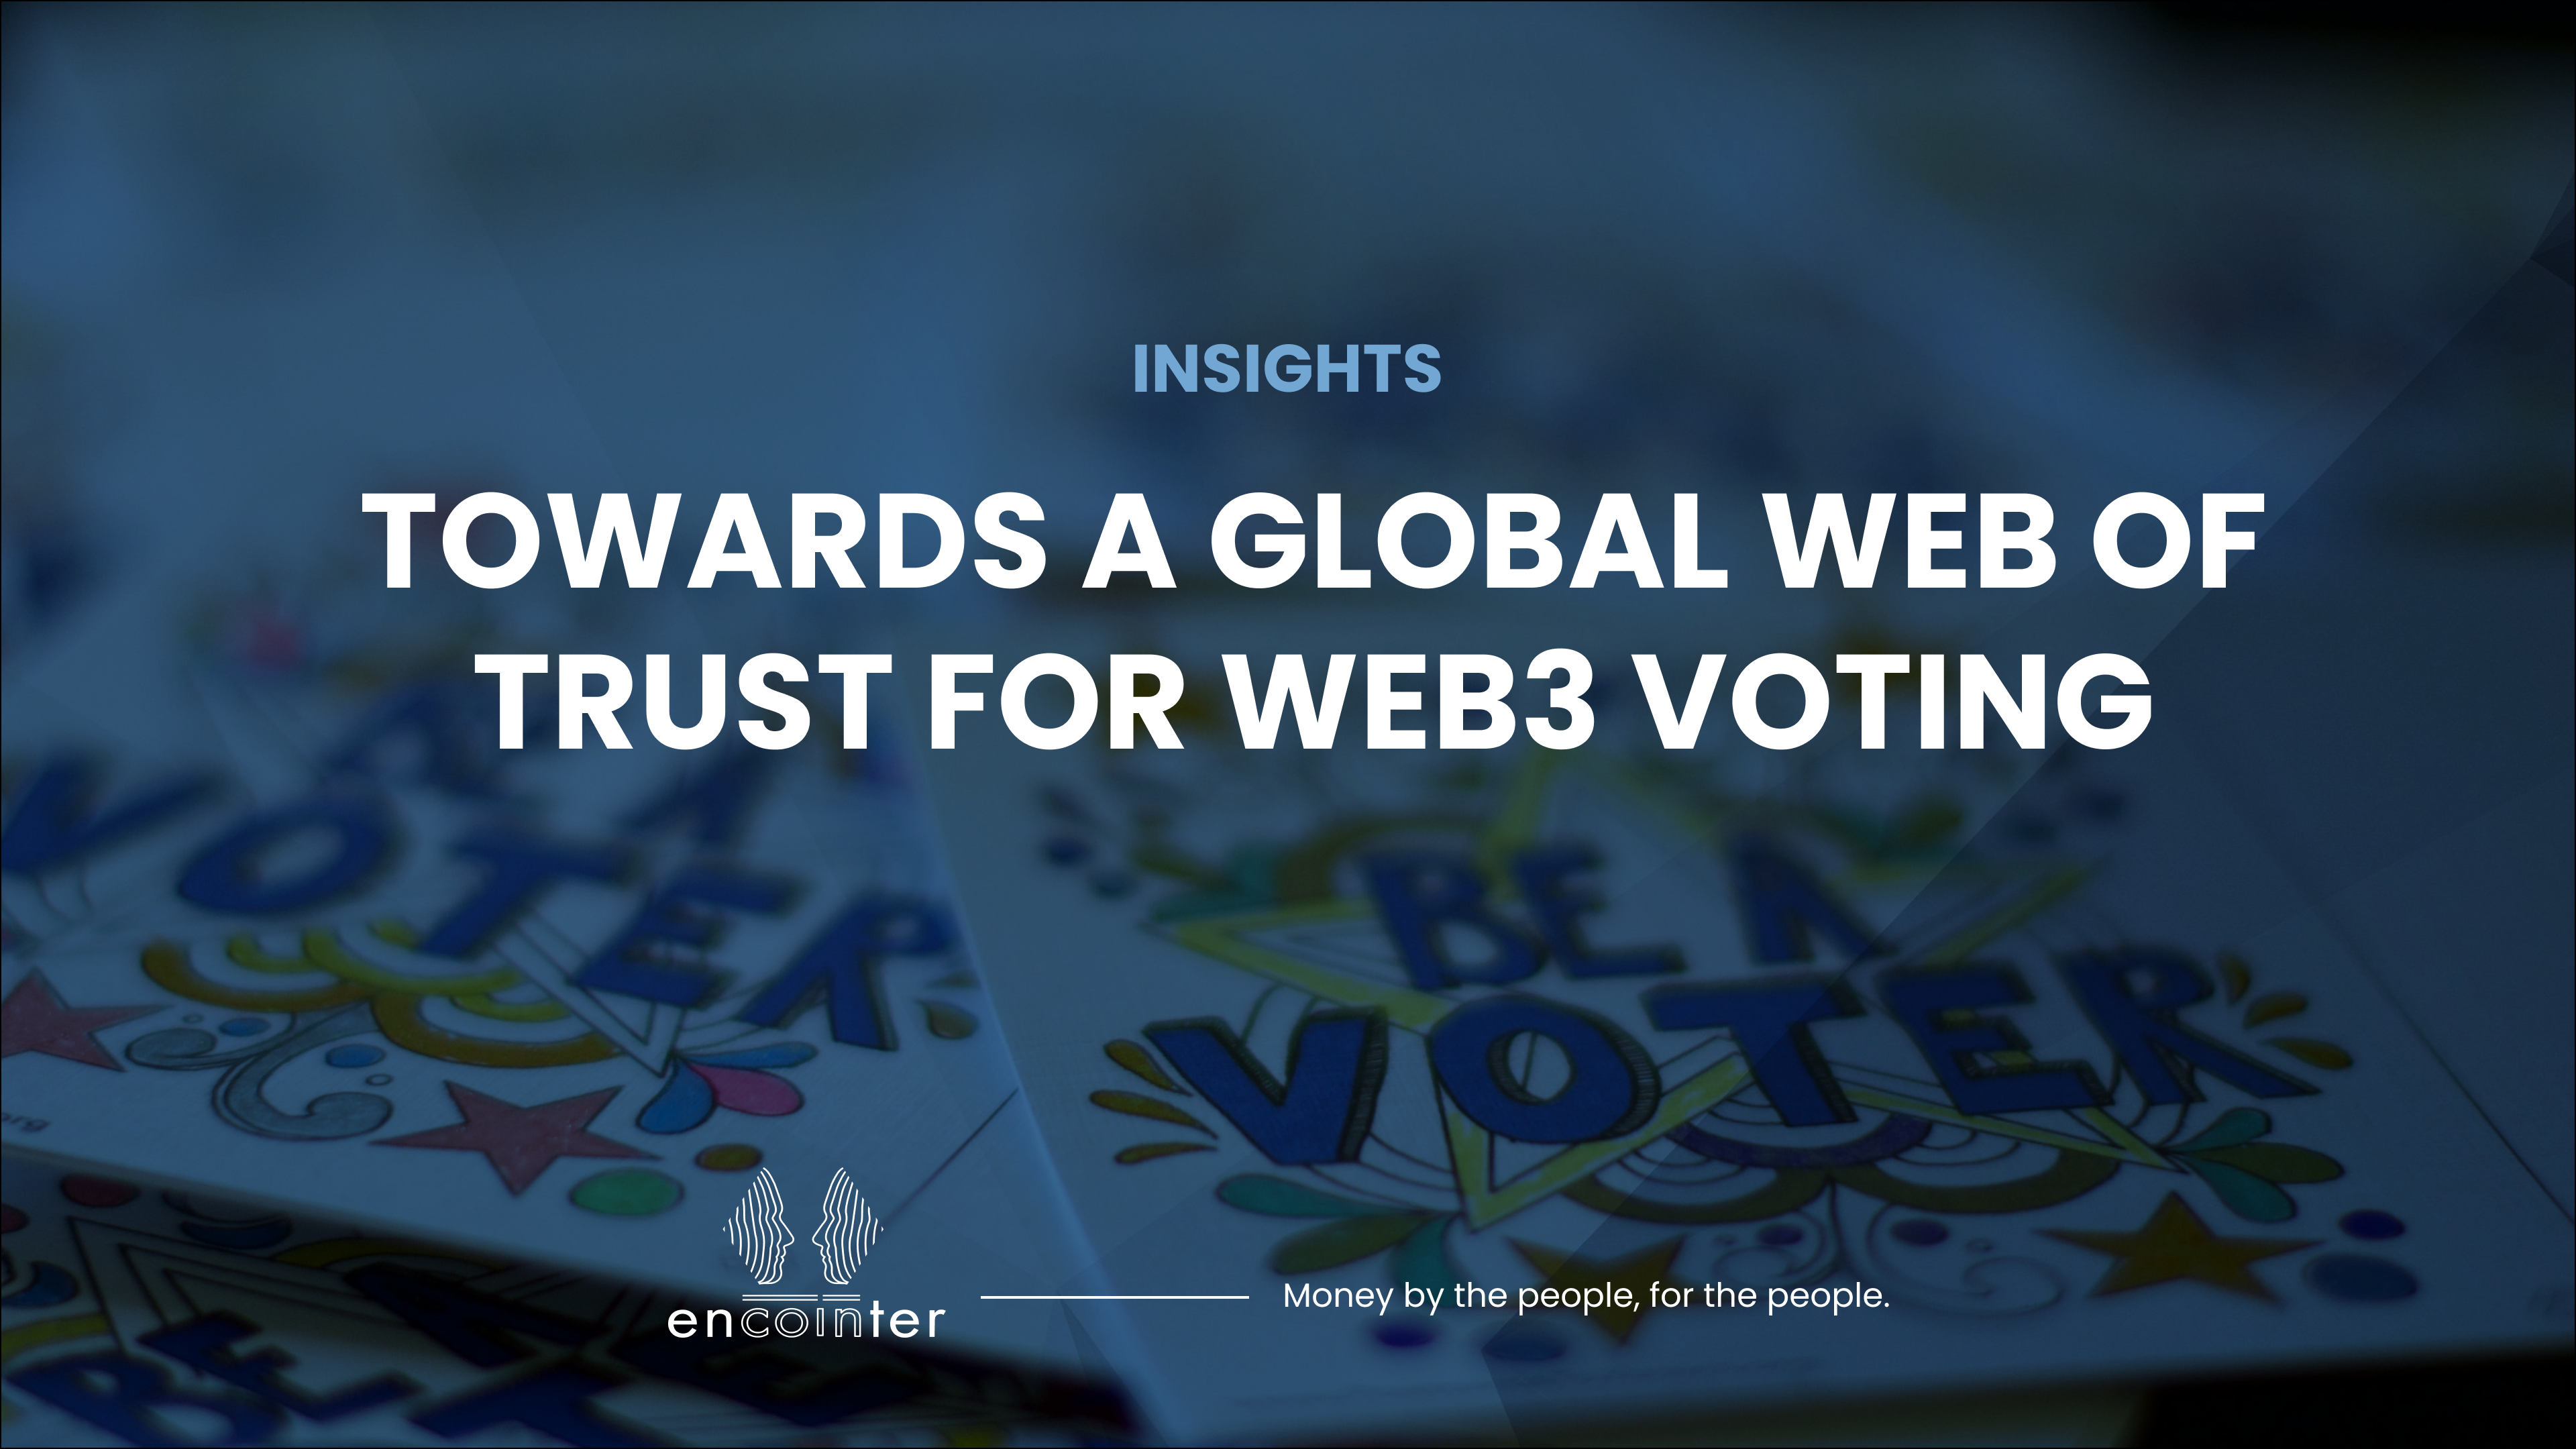 TOWARDS A GLOBAL WEB OF TRUST FOR WEB3 VOTING